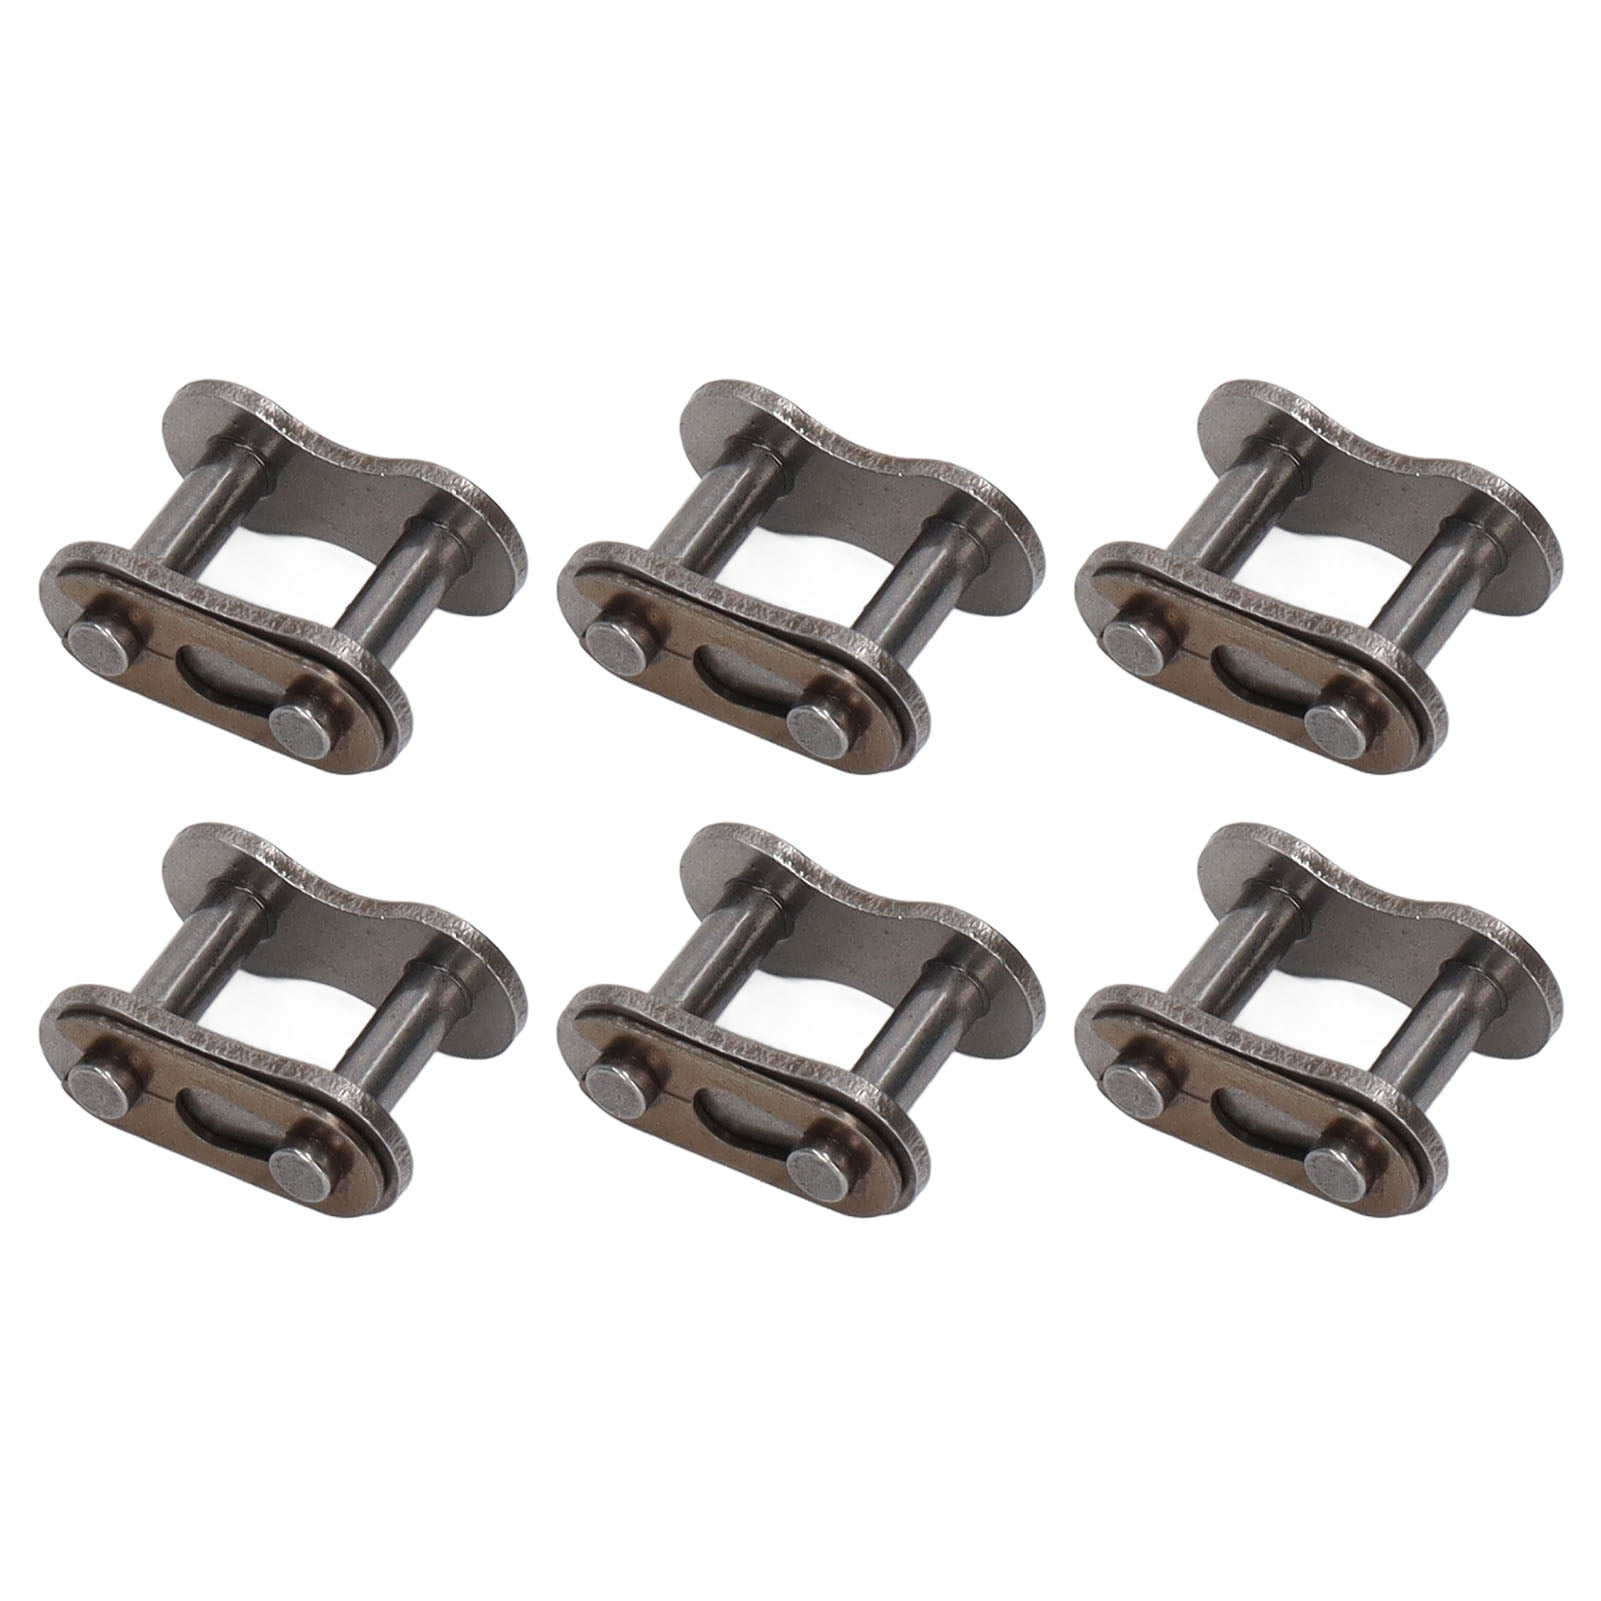 662 Pintle Chain Connecting 4 Pack 1.664" Pitch Master Link 